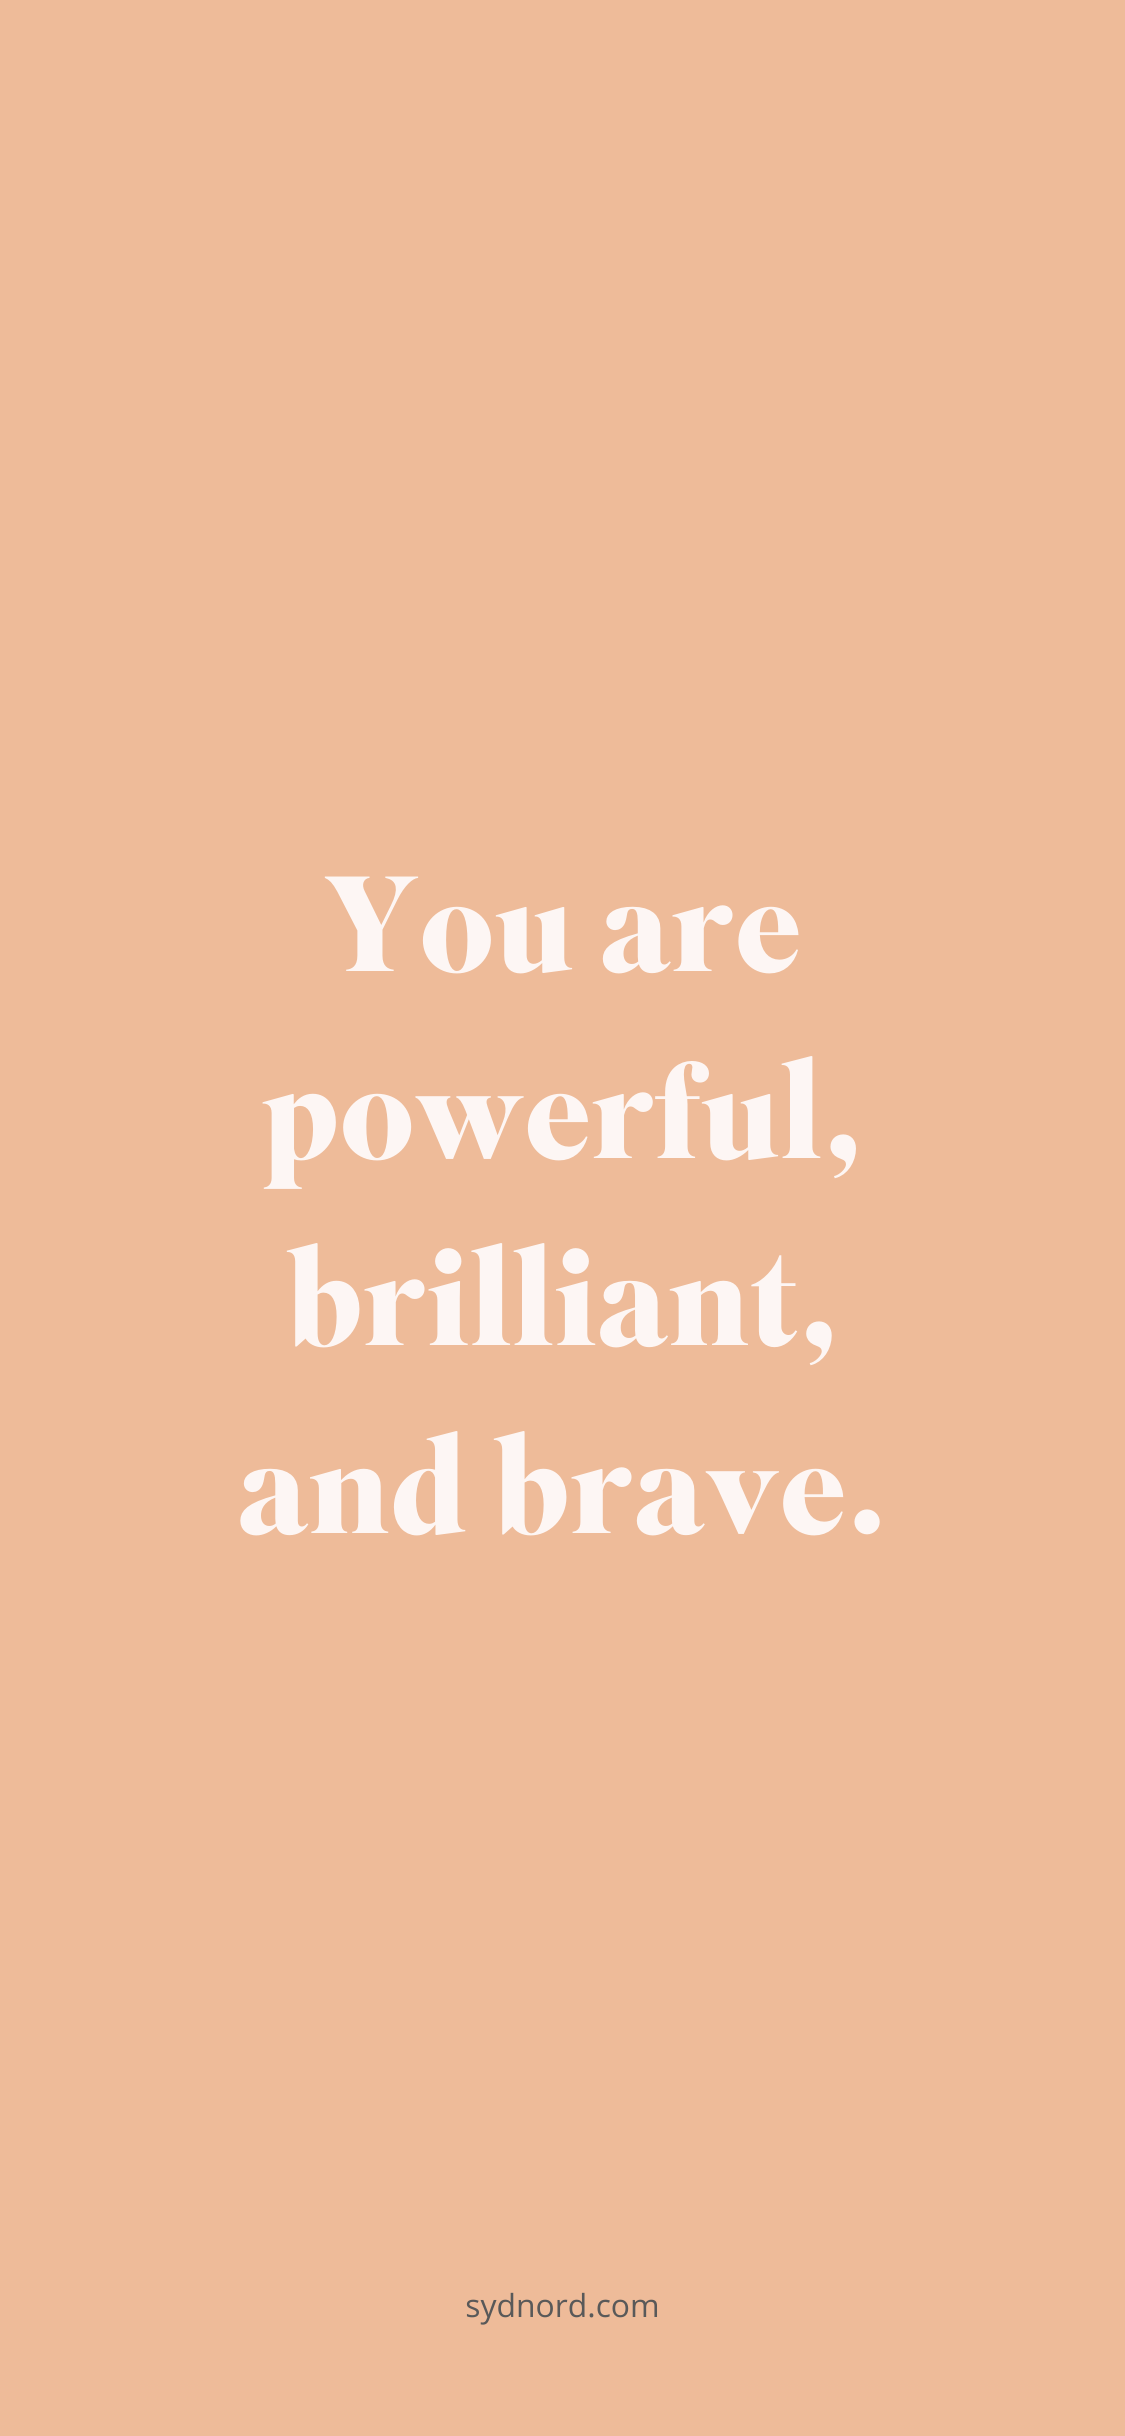 You are powerful, brilliant, and brave.